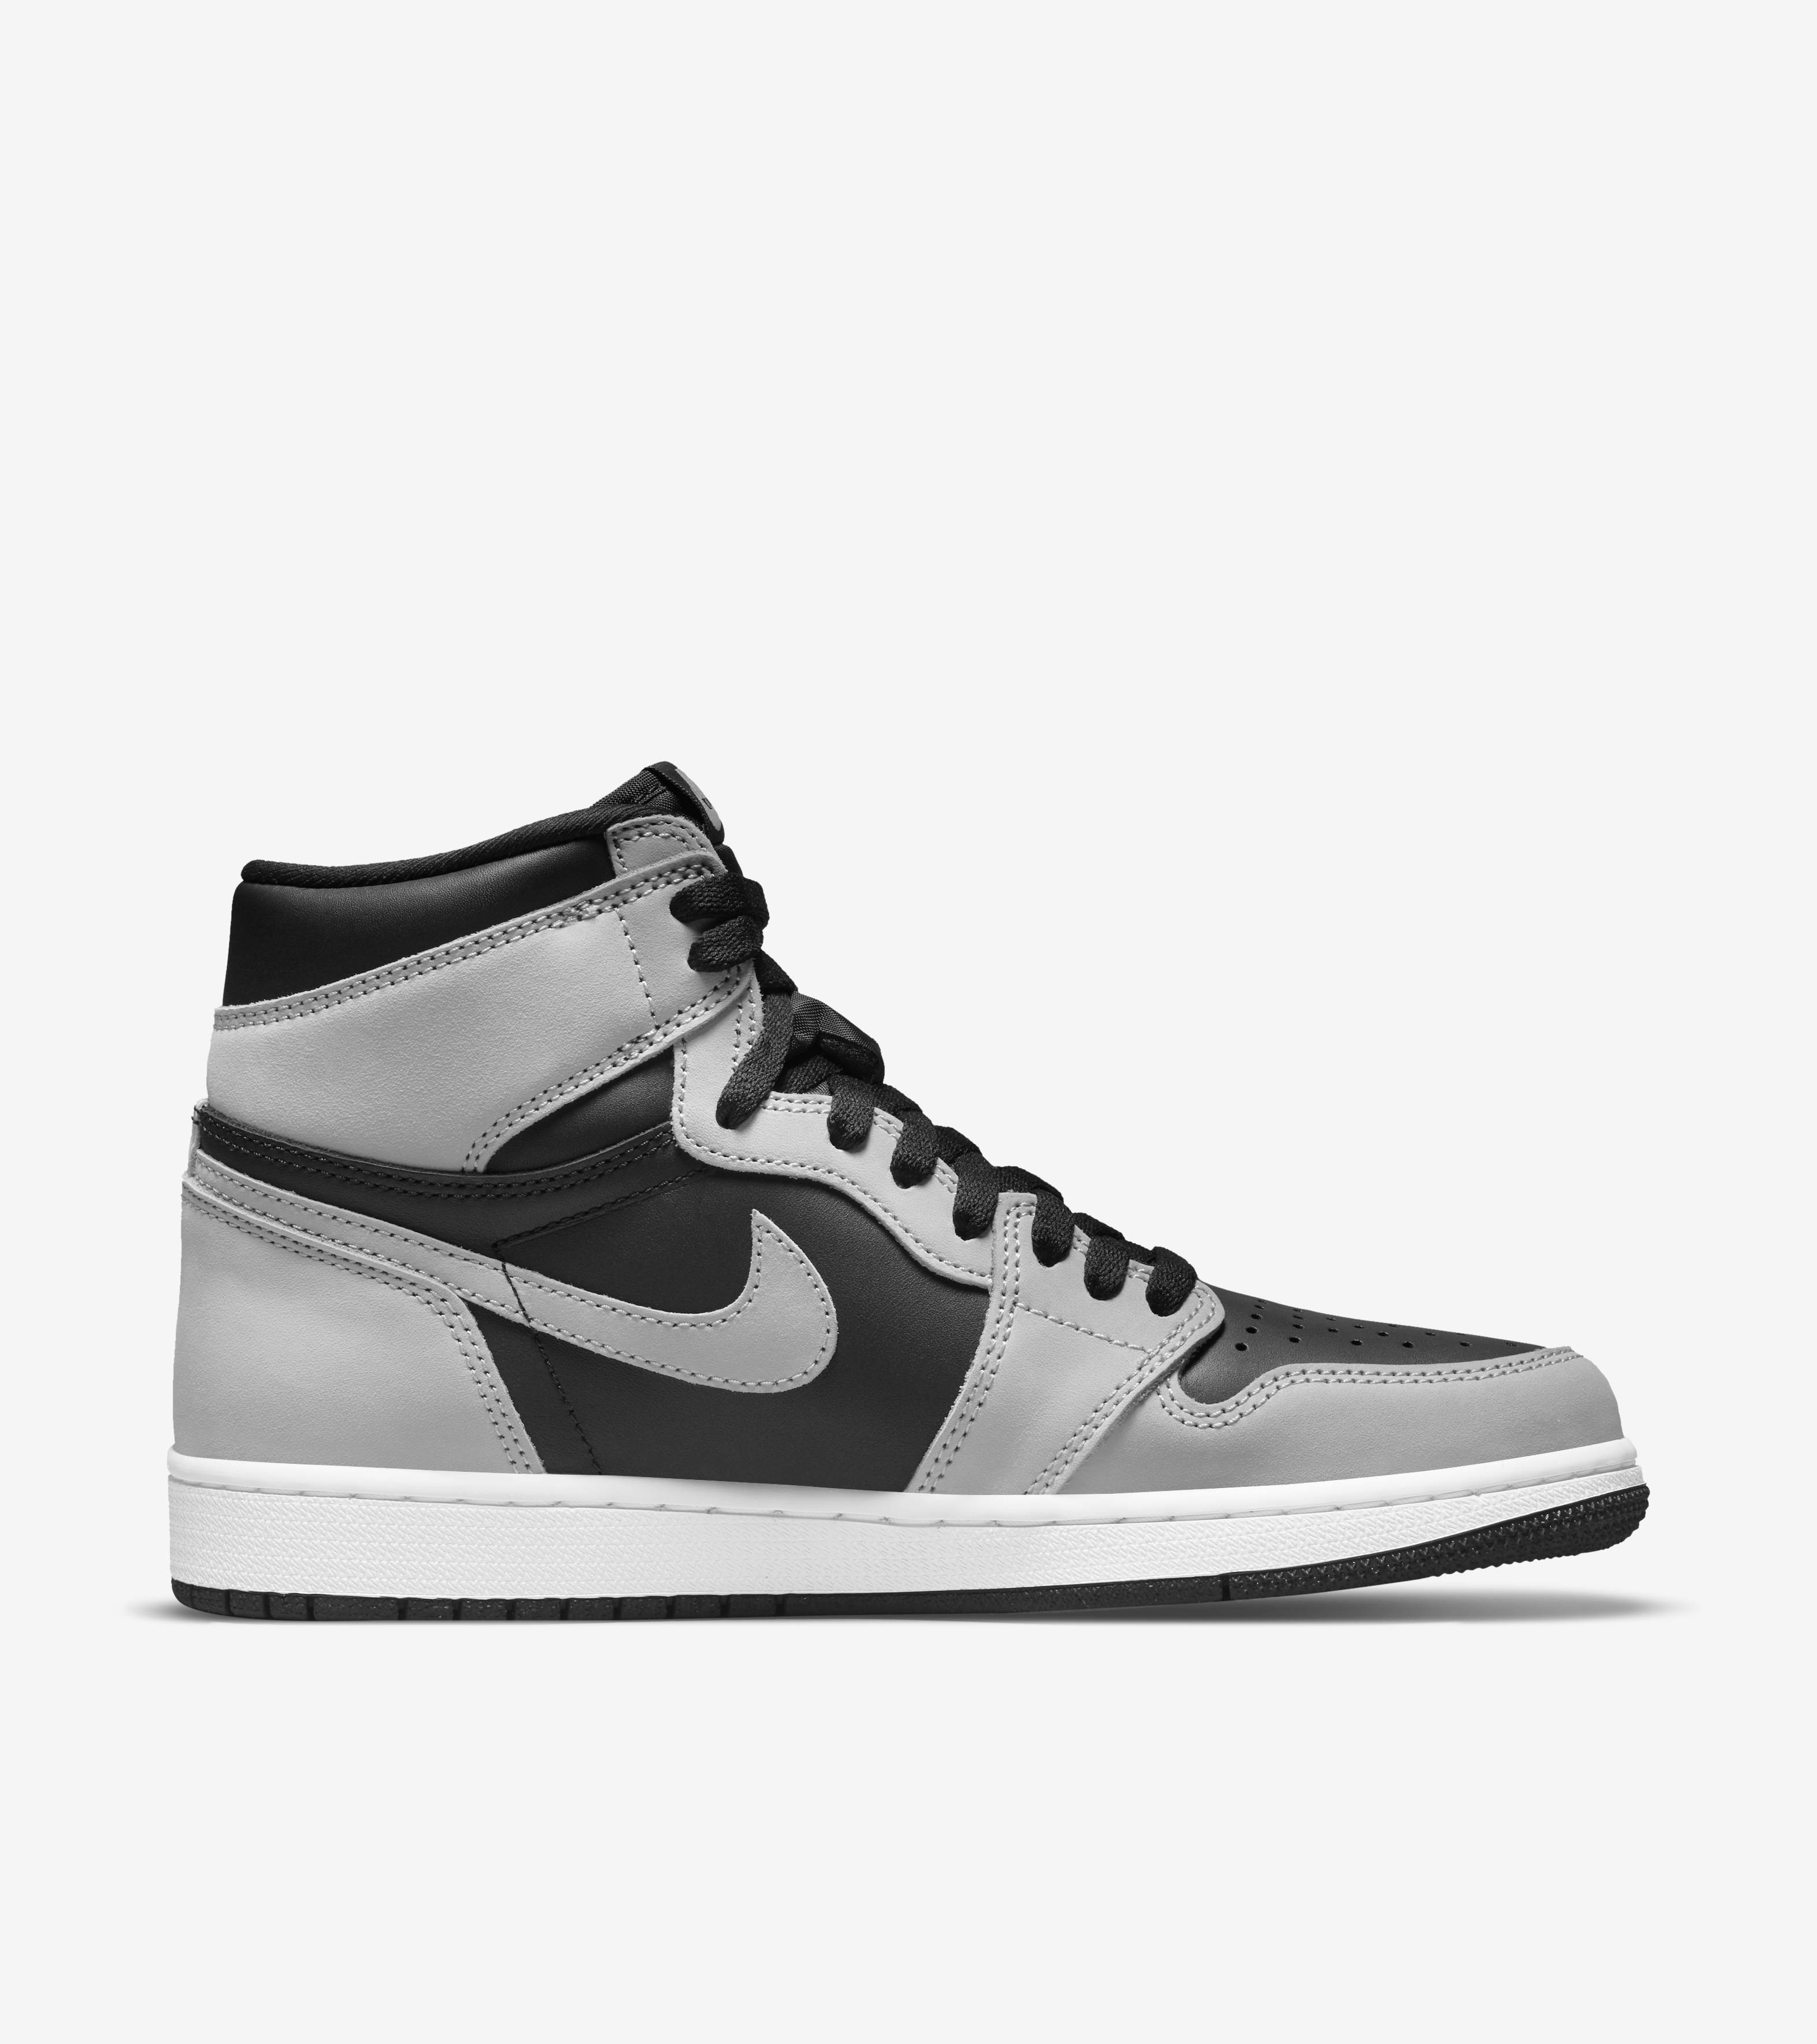 Official Images of the Nike Air Jordan 1 High 